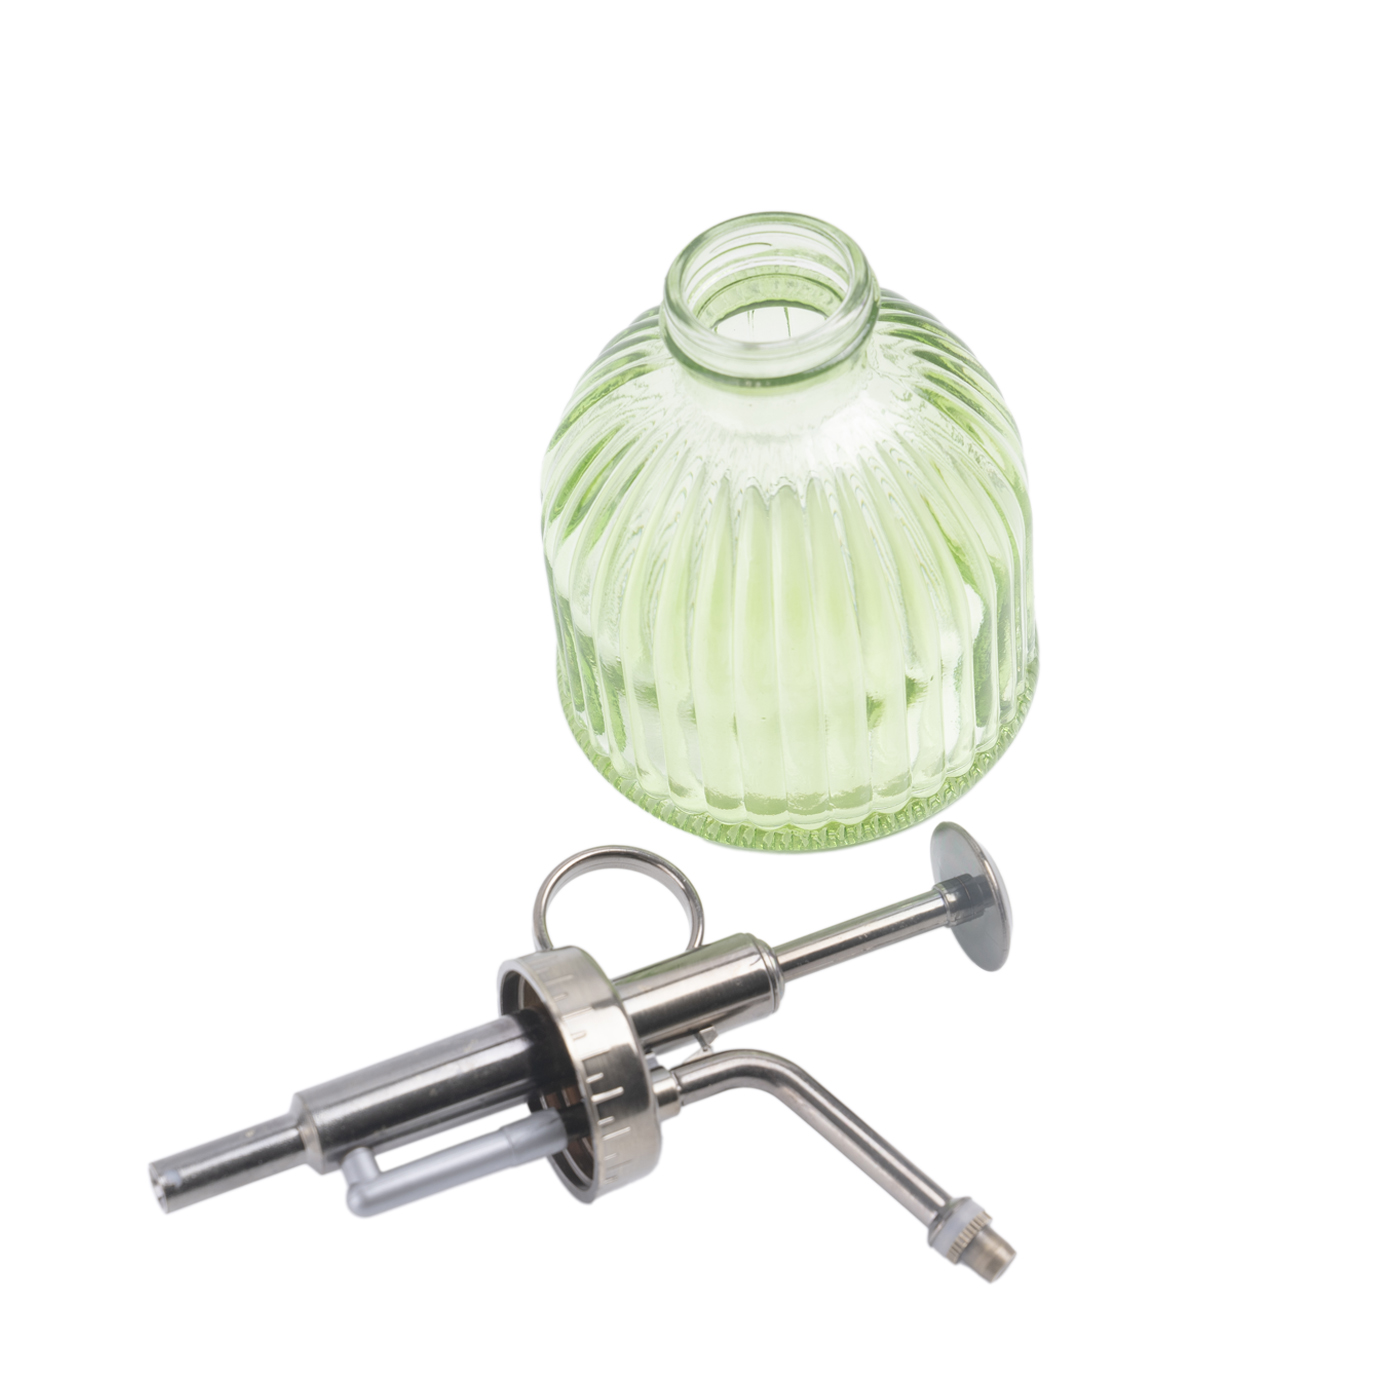 Retro Glass Watering Can2